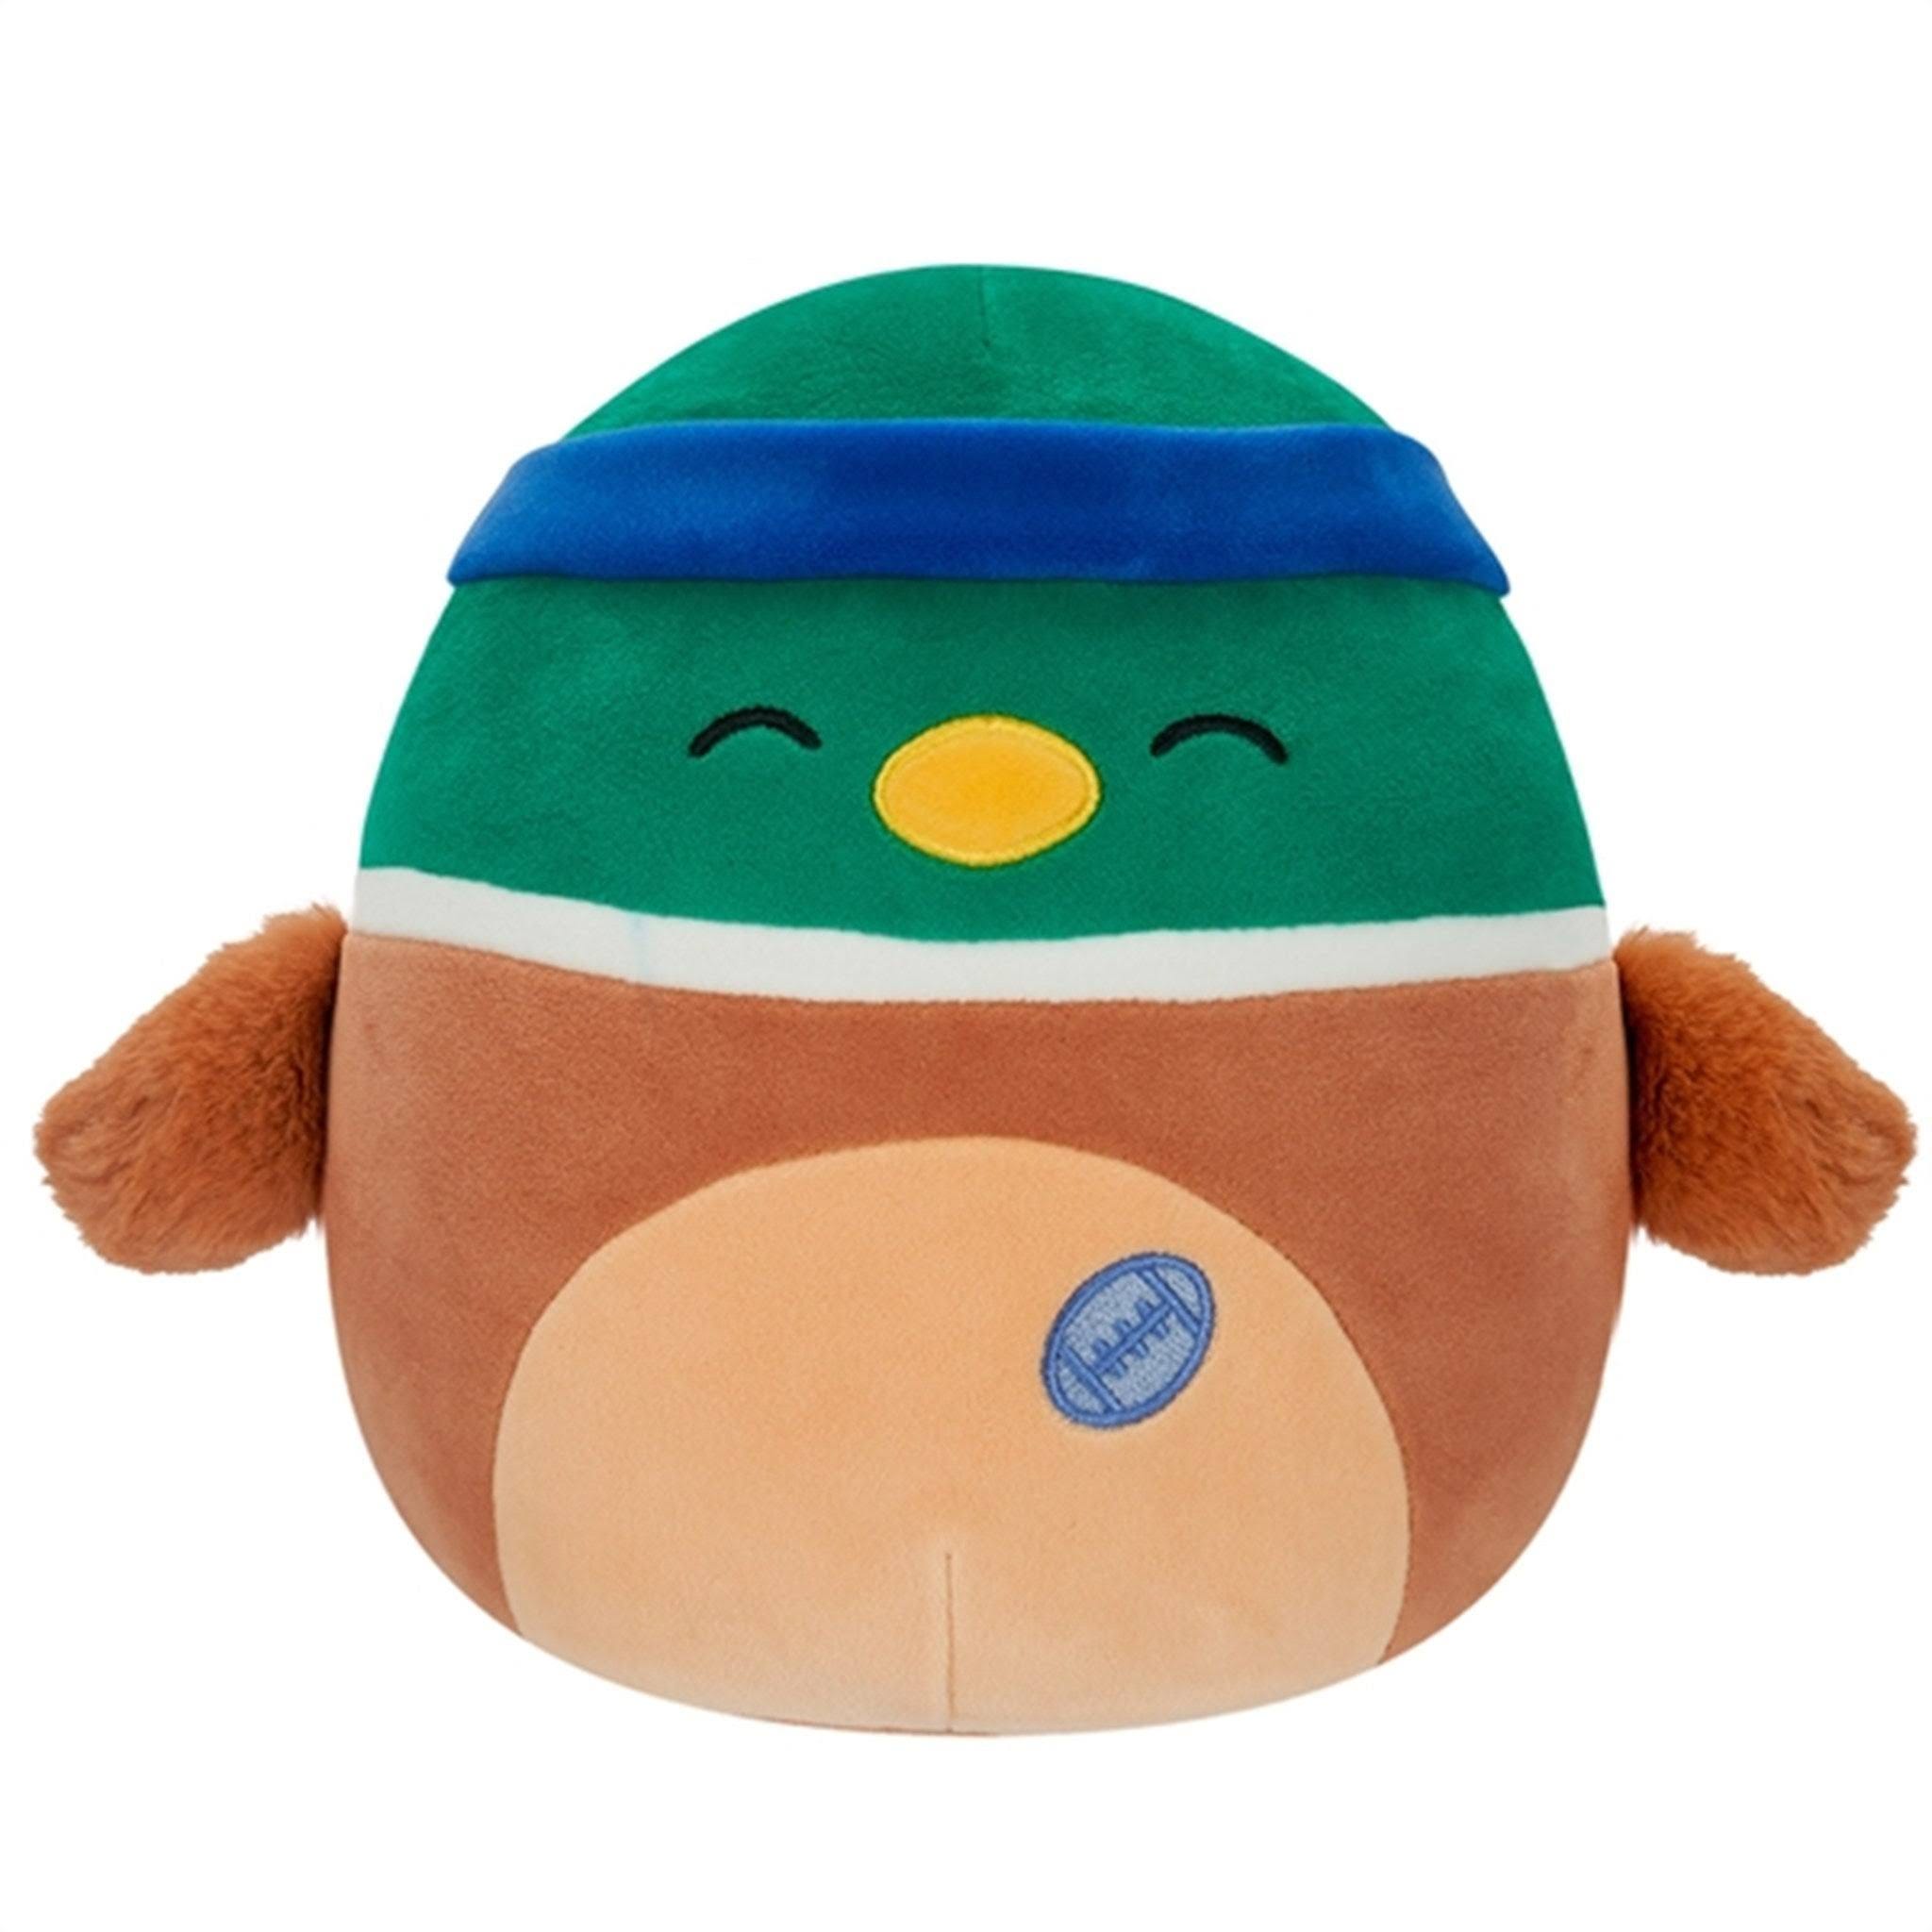 Avery the Duck Squishmallow Sweatband & Rugby Ball | Image